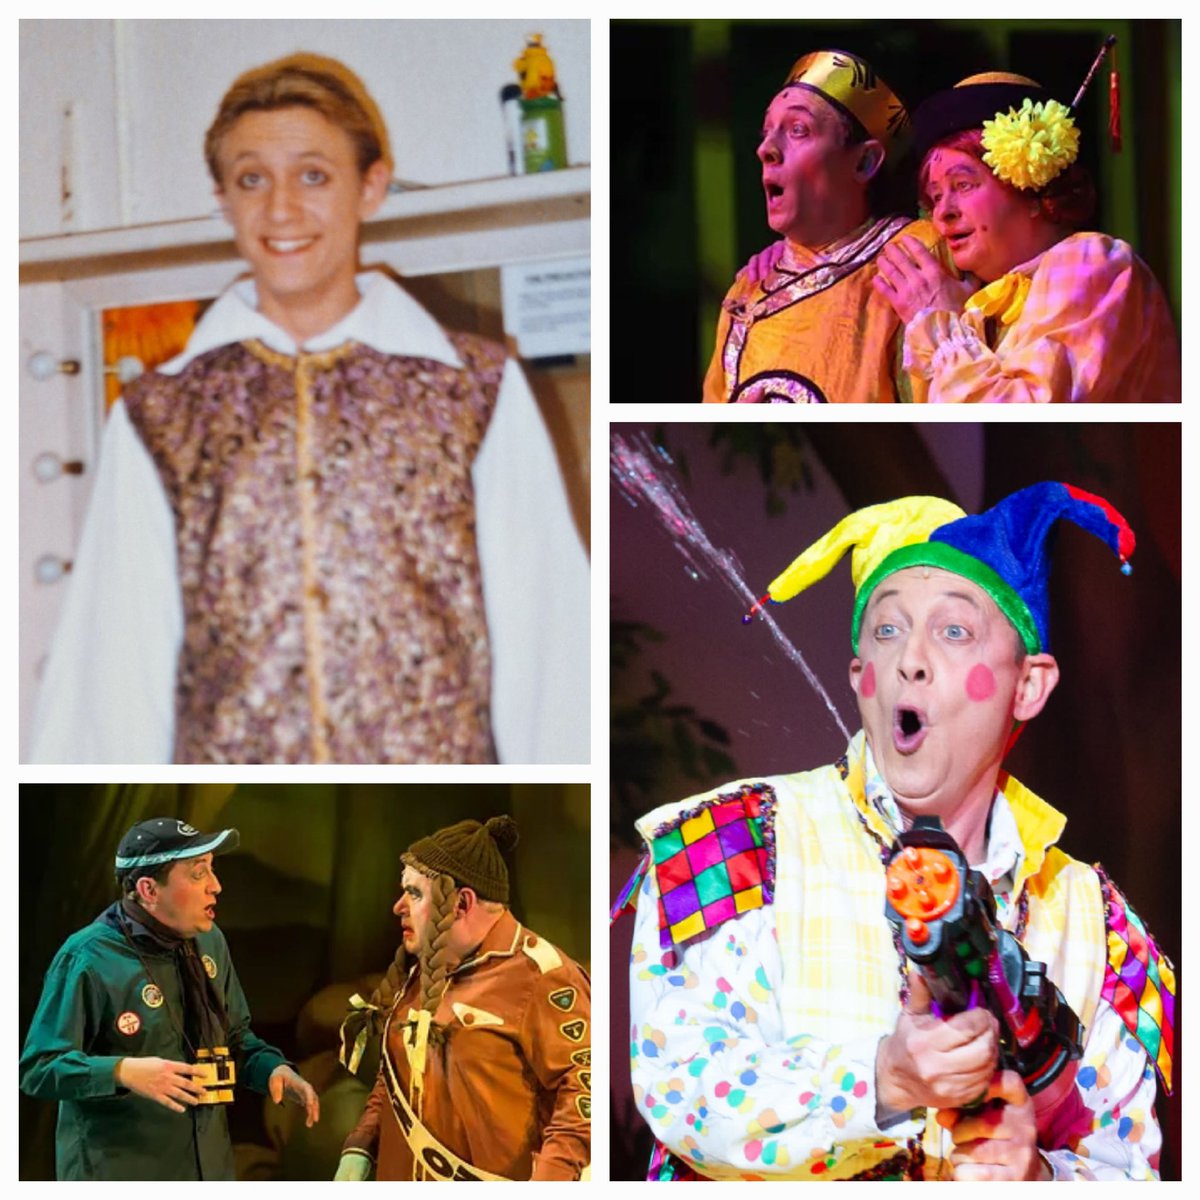 Tonight is panto performance no. 1,200 for me @TheatreRBath. I'll try to get this one right. Huge thanks to many along the way, especially @UKP_Ltd and my two mums; the never forgotten Chris Harris and the ever fabulous @n1ckwilton x